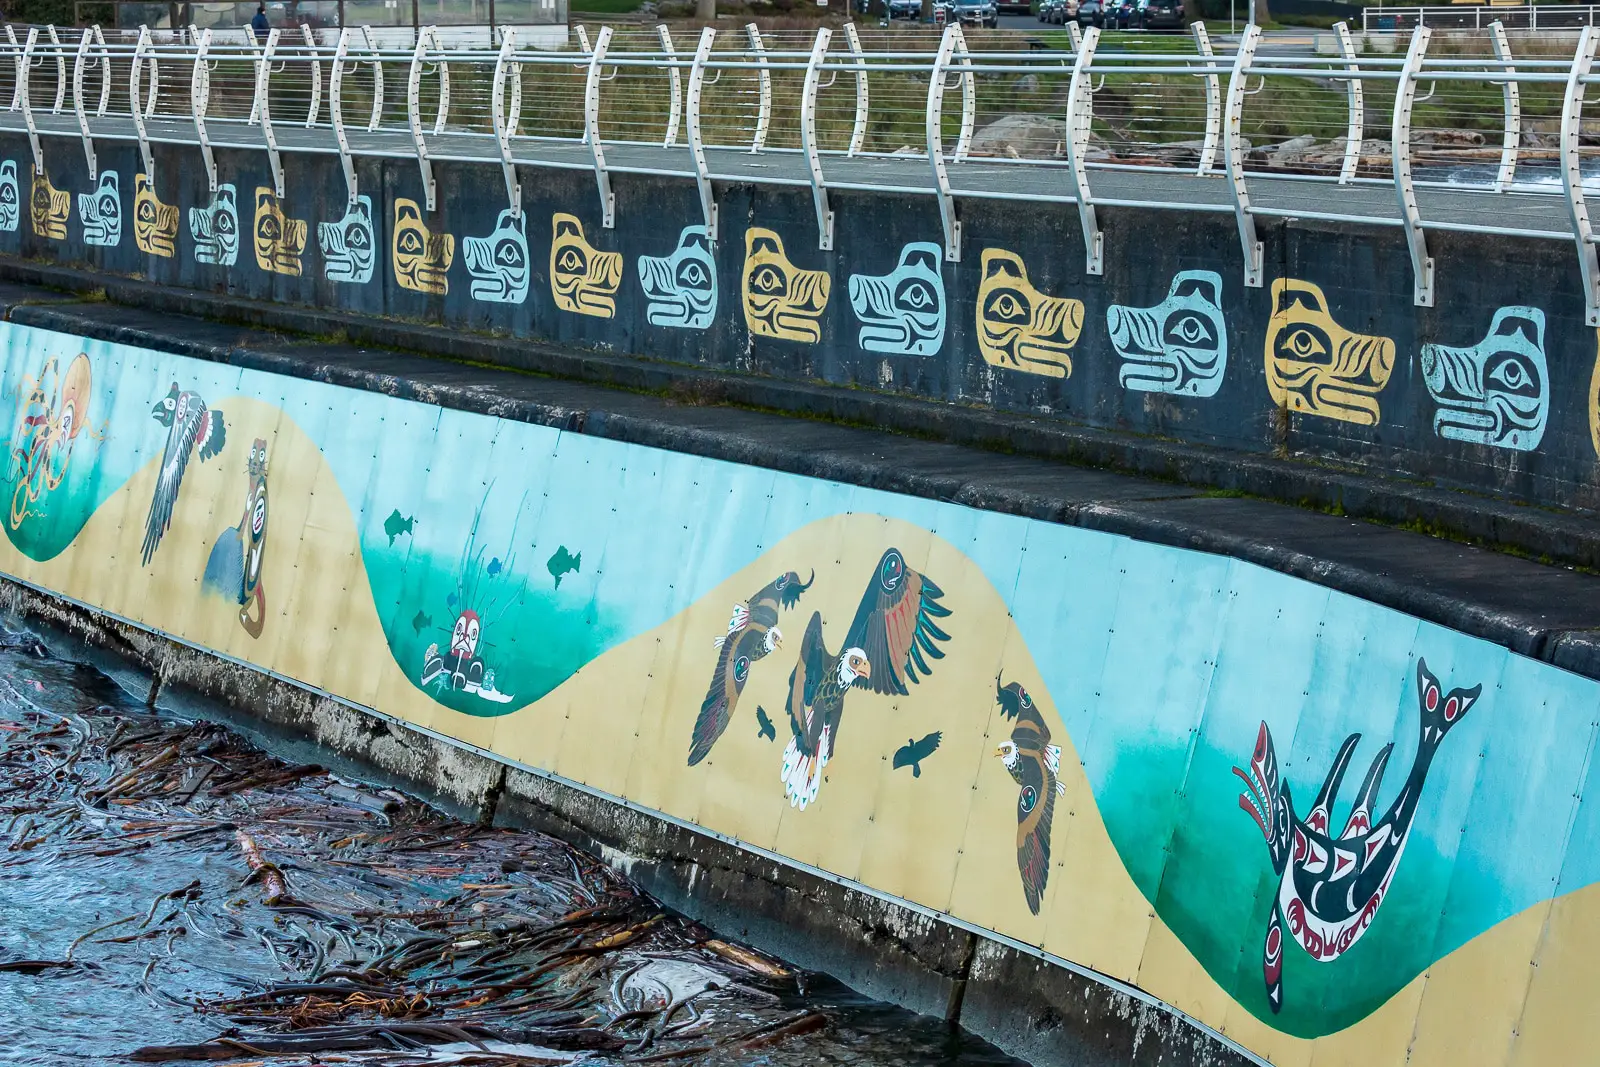 The Unity Wall Mural honoring the Esquimalt and Songhees Nations